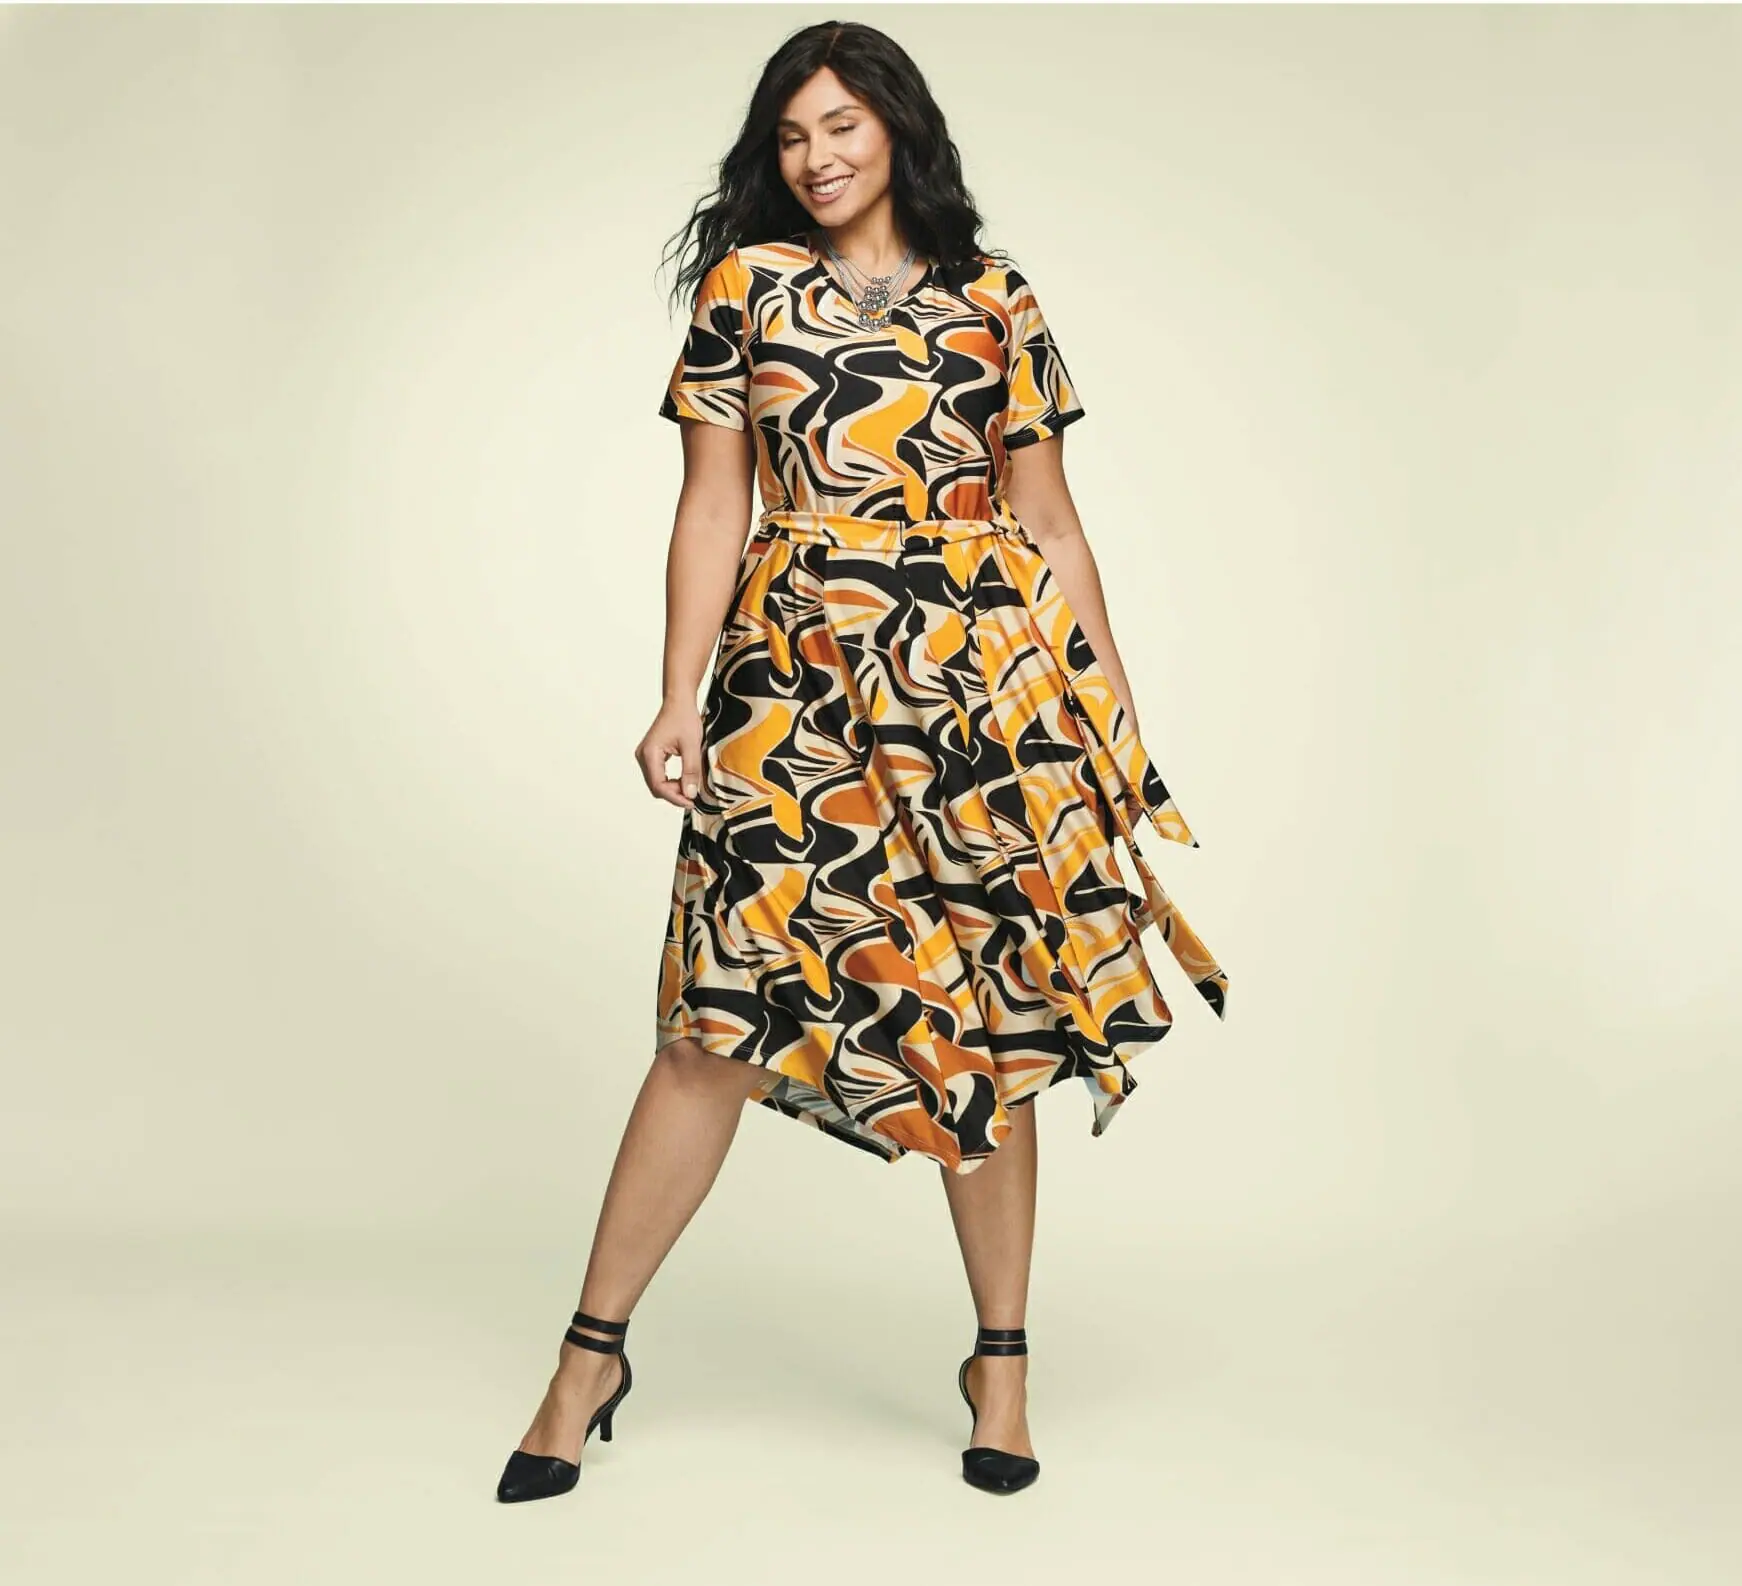 My XL  set is a great outfit idea for Thanksgiving - I loved the  color on my midsize curvy shape